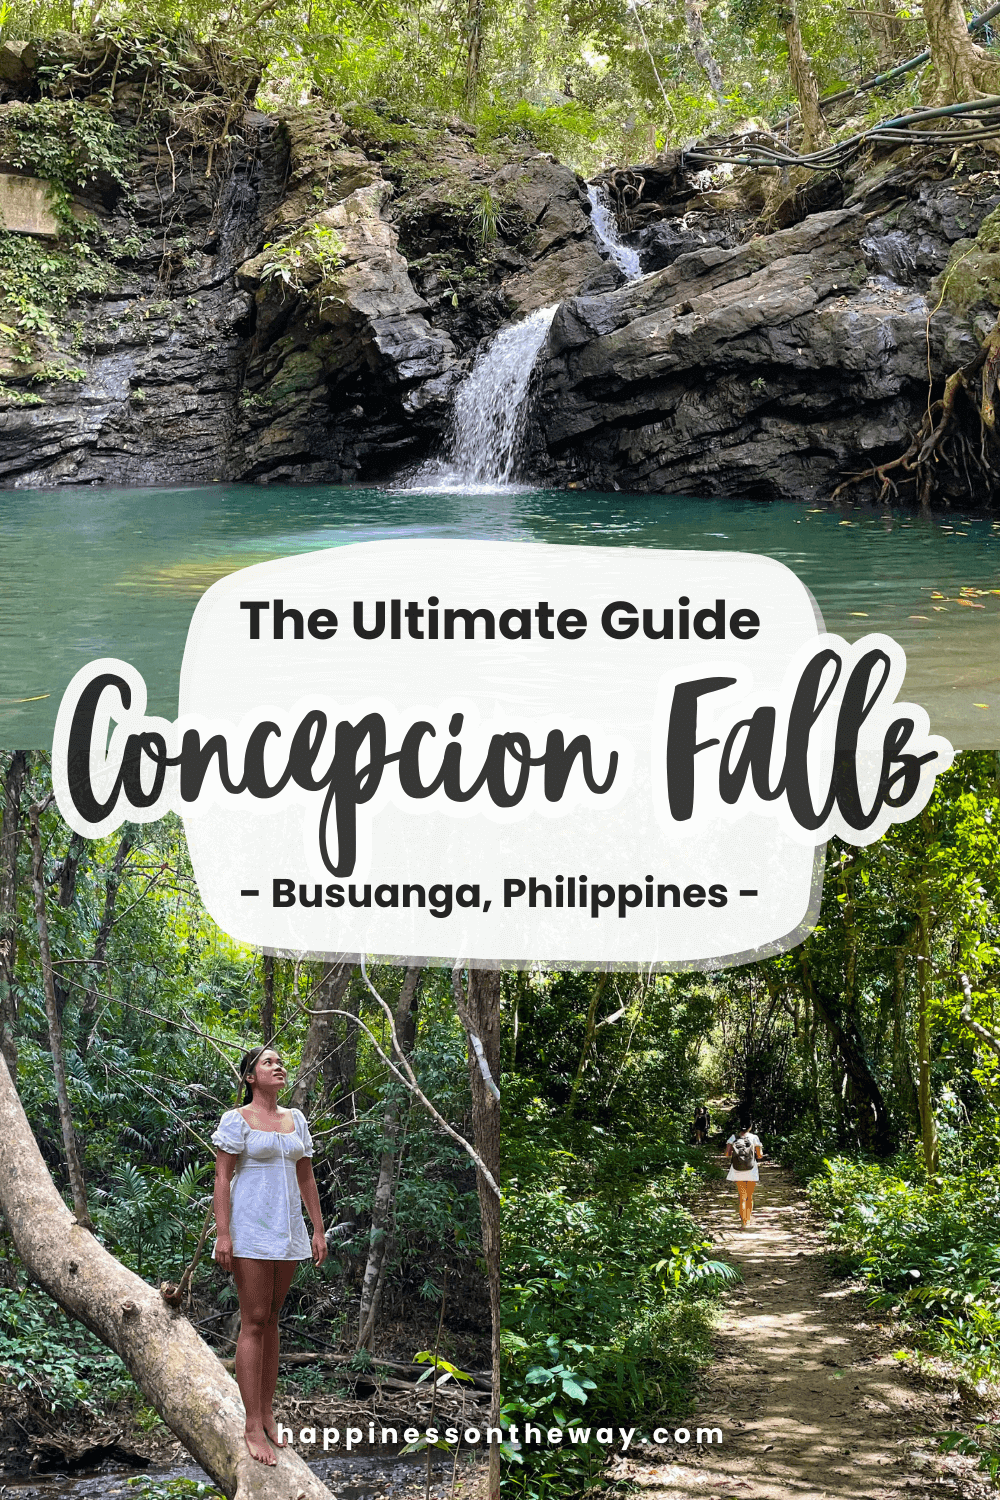 The Ultimate Guide Concepcion Falls Busuanga Philippines near Coron Palawan